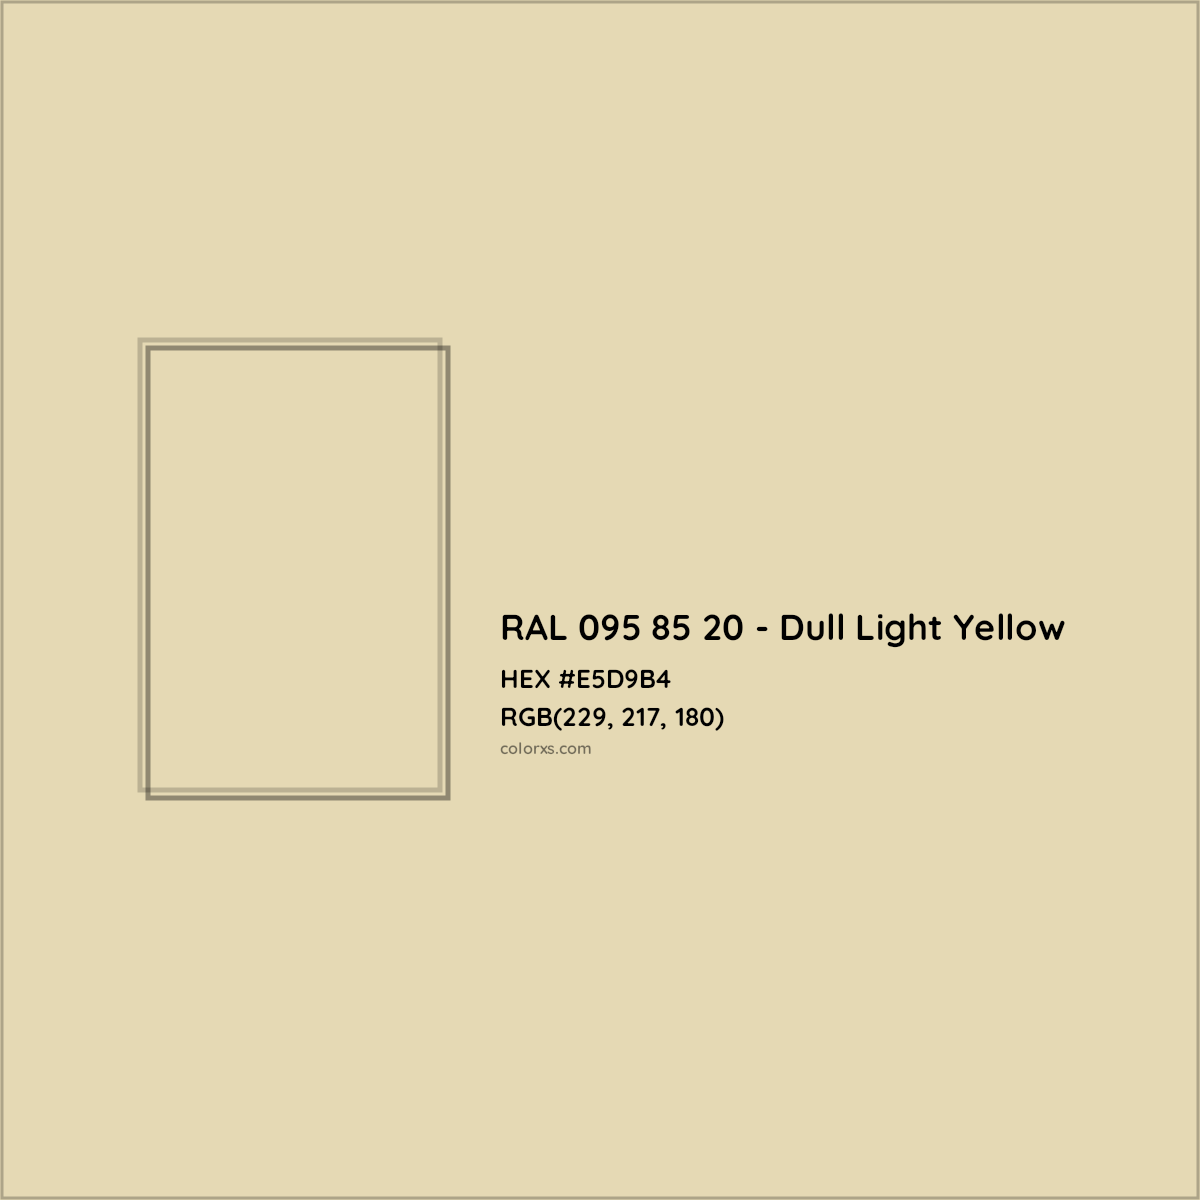 HEX #E5D9B4 RAL 095 85 20 - Dull Light Yellow CMS RAL Design - Color Code